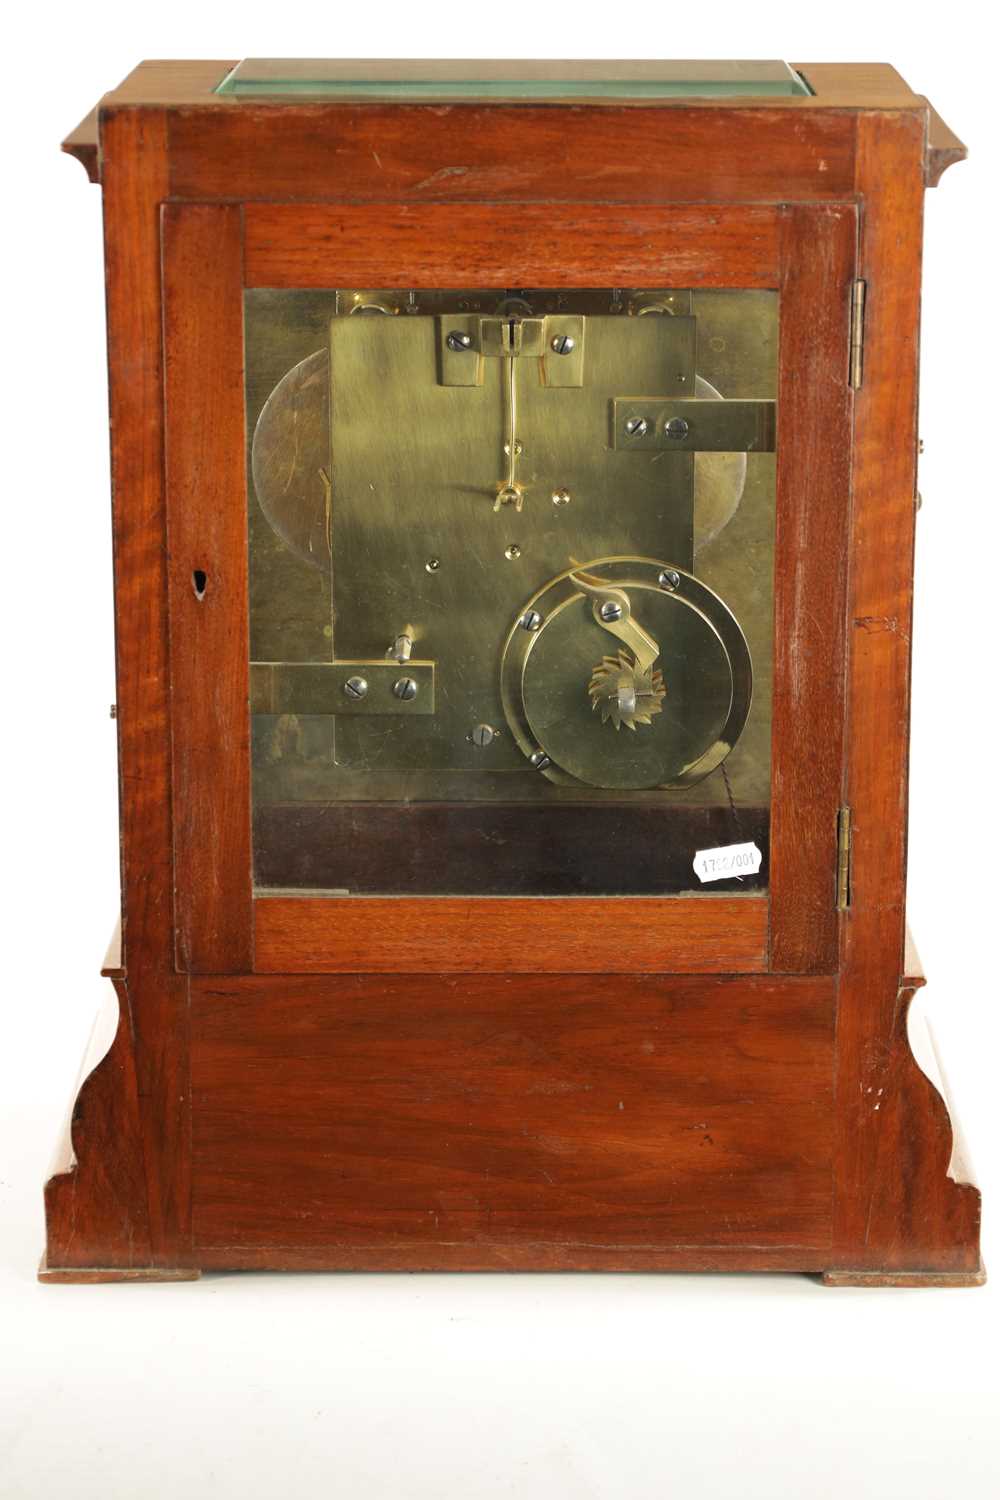 NORMAN, PIMLICO. A LARGE MID 19TH CENTURY BURR WALNUT CASED MONTH DURATION TABLE REGULATOR CLOCK - Image 9 of 14